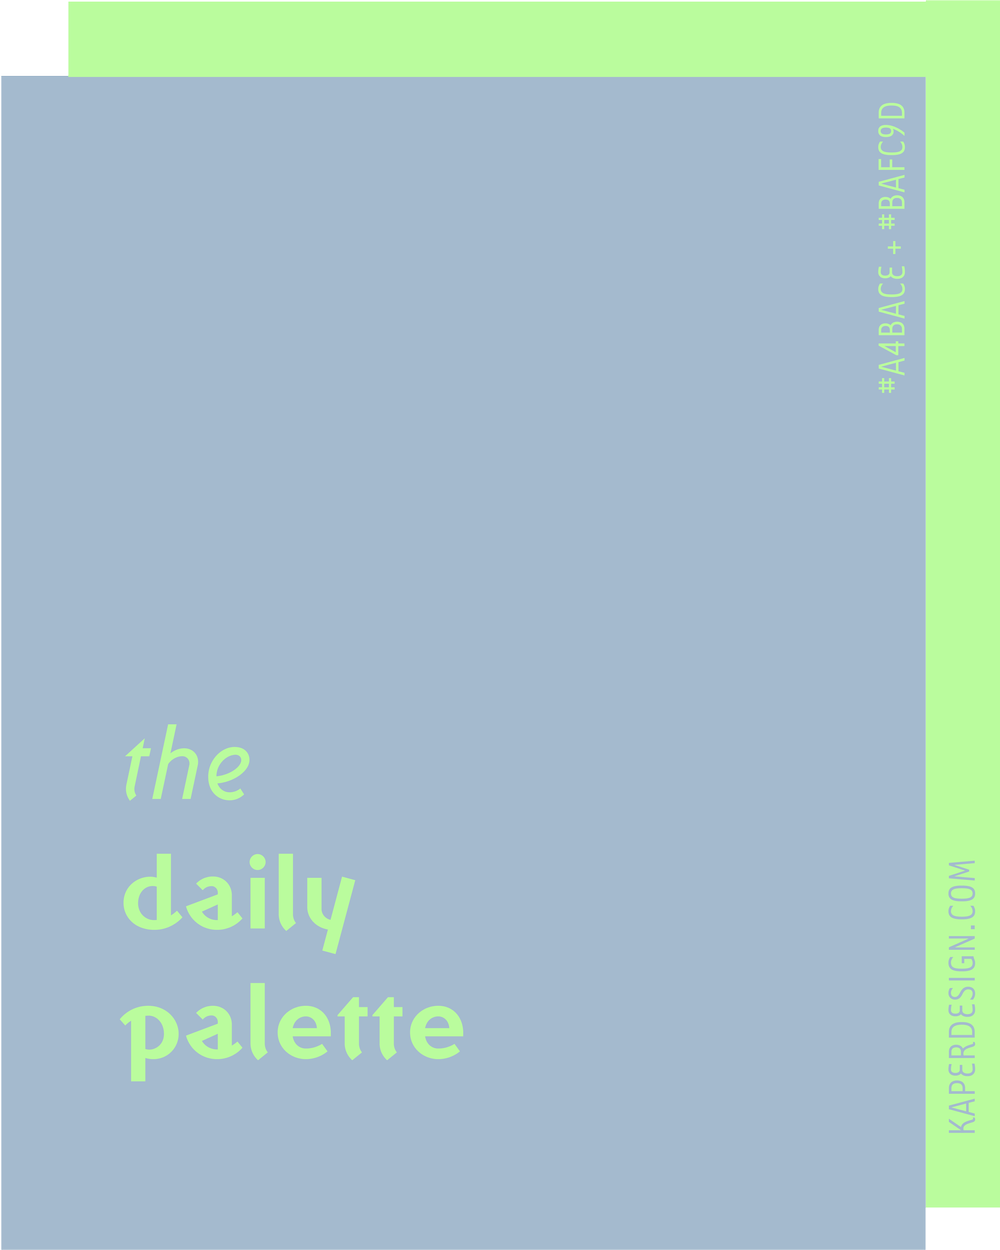 Kaper Design_the Daily Palette Project-15.png